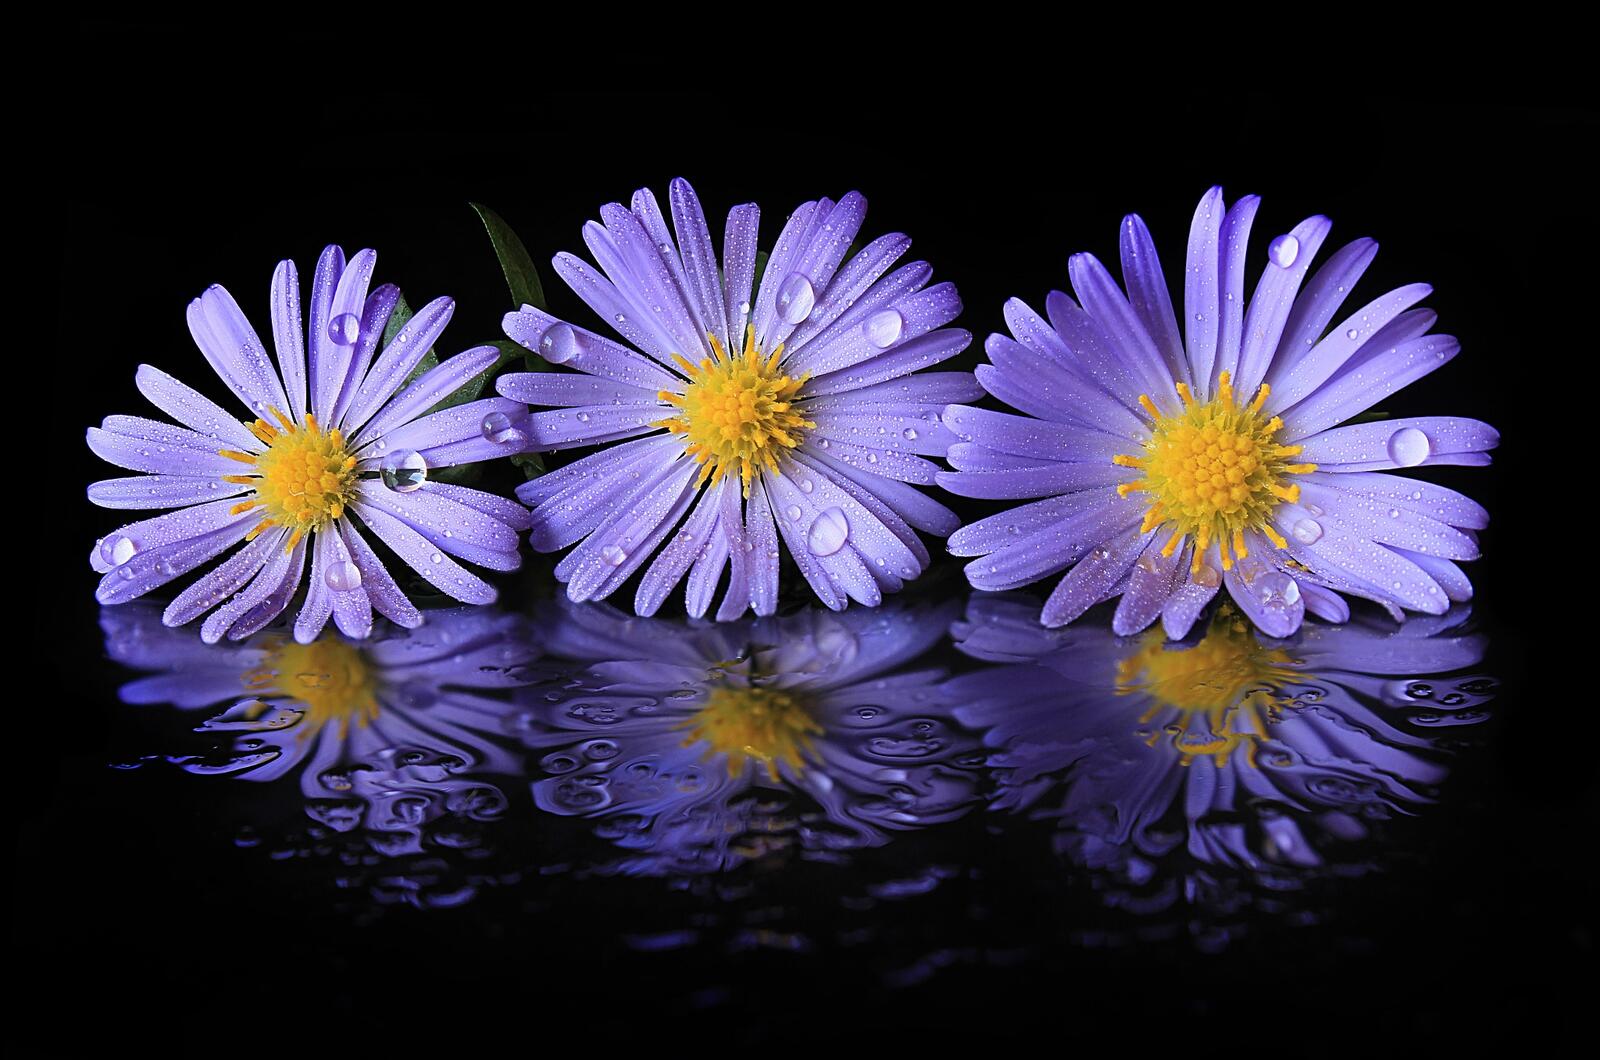 Wallpapers Aster flowers black background on the desktop